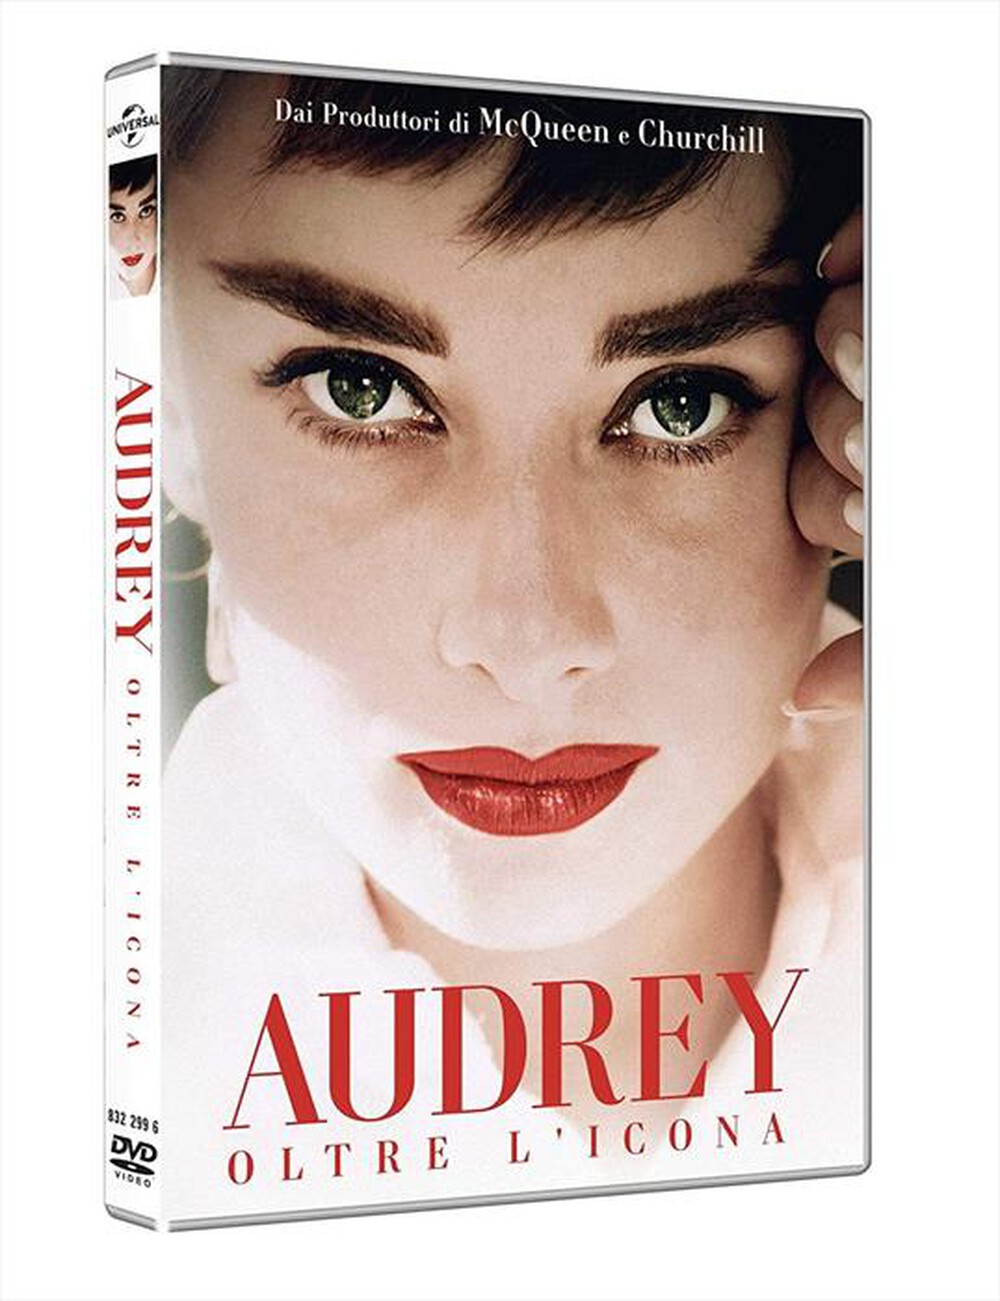 "UNIVERSAL PICTURES - Audrey"